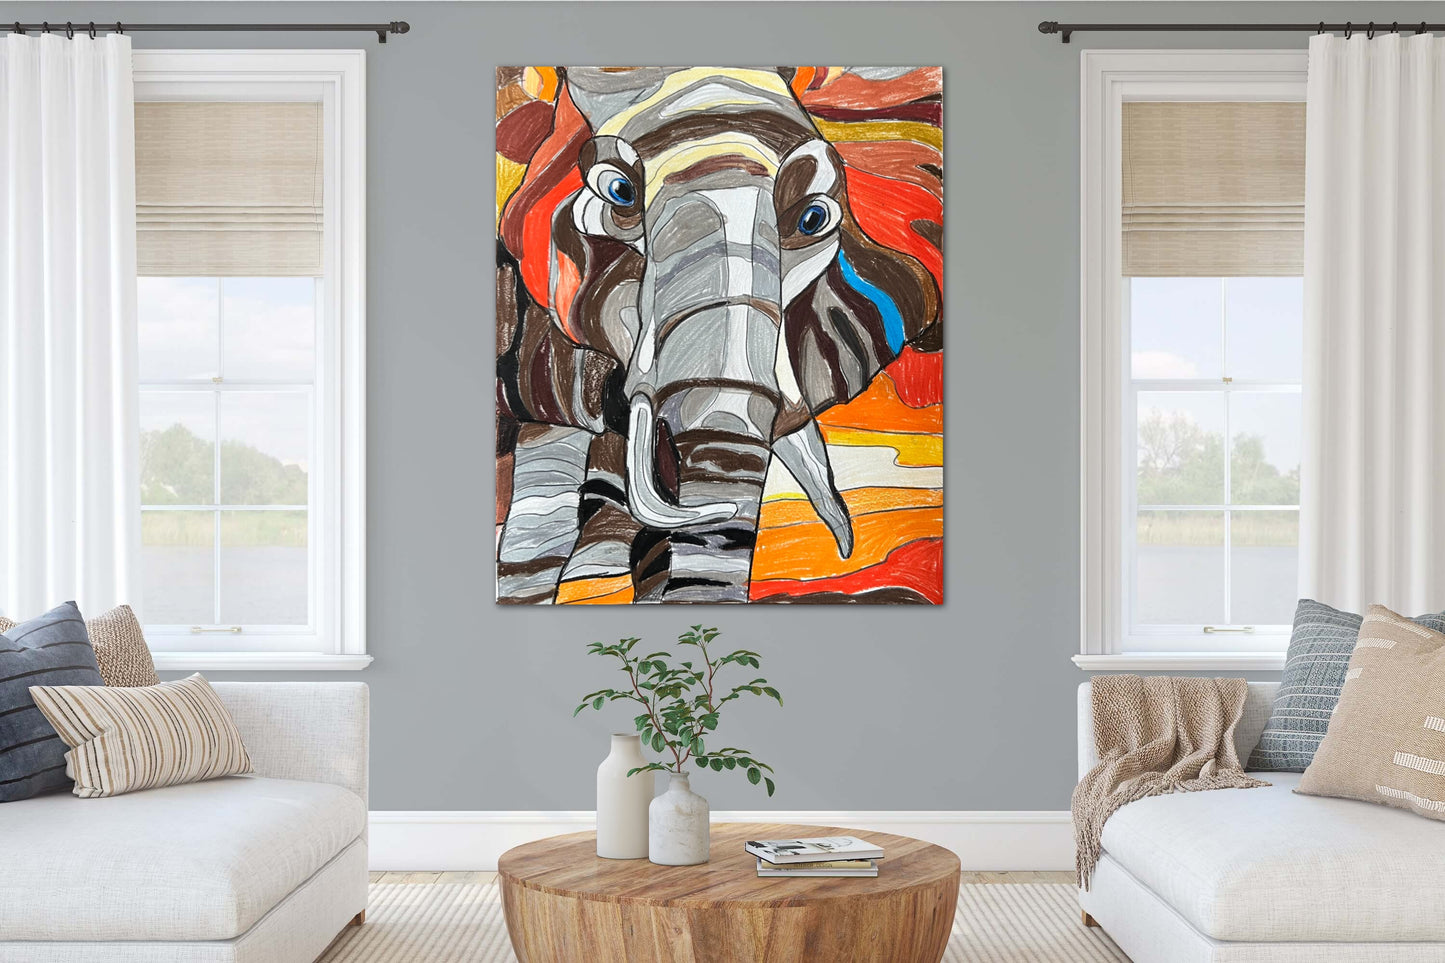 The Safari Collection: The Elephant - Print, Poster, Stretched Canvas Print